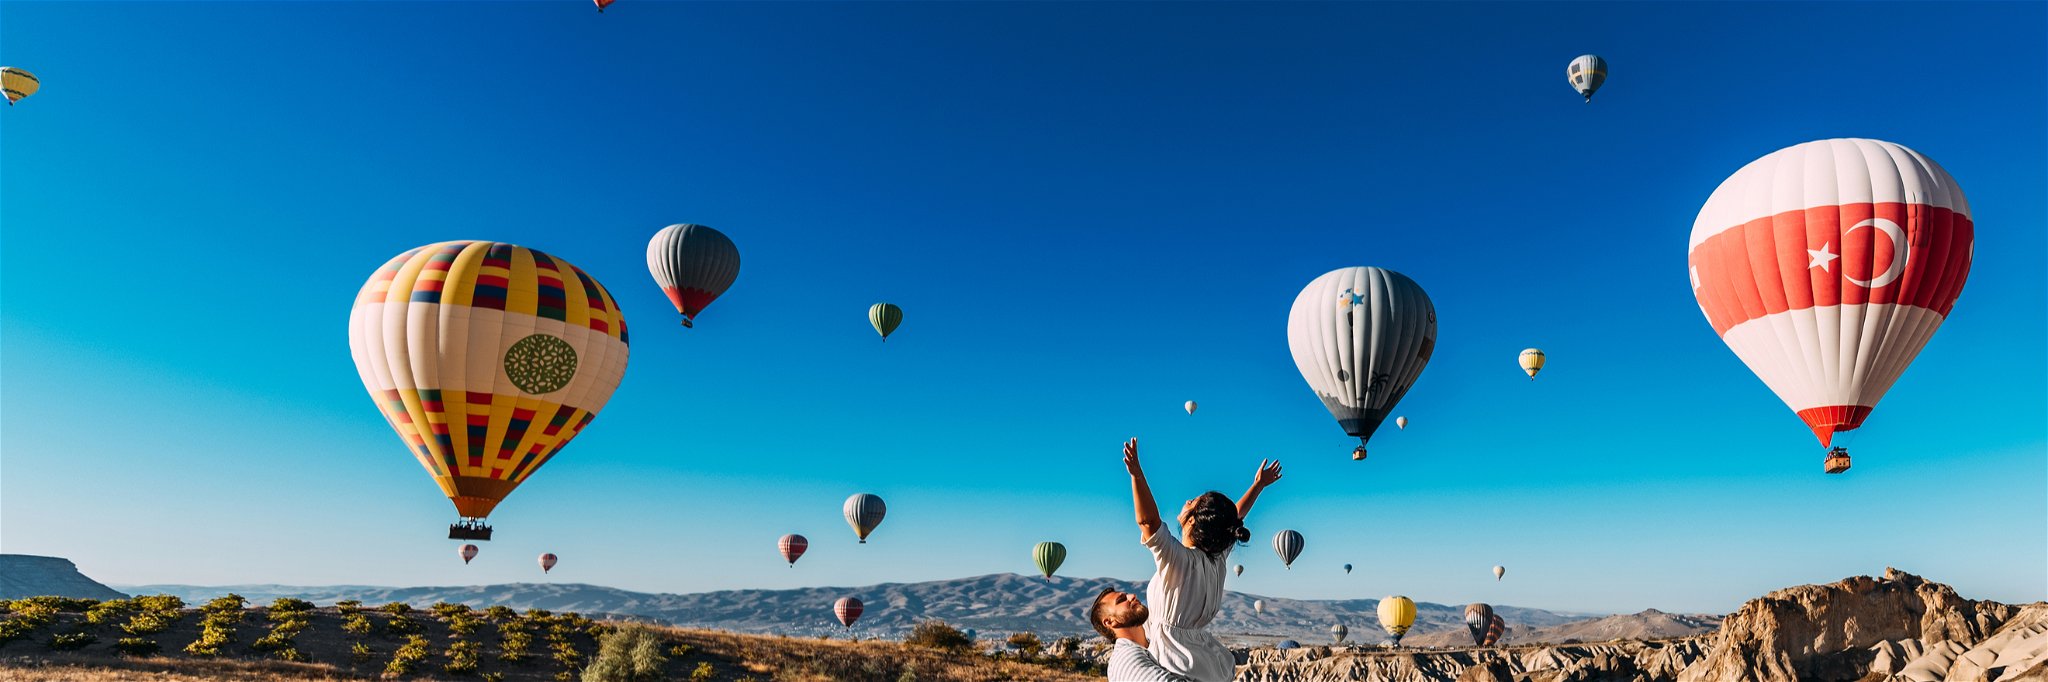 A&nbsp;hot air balloon&nbsp;ride is a perfect experience for two.